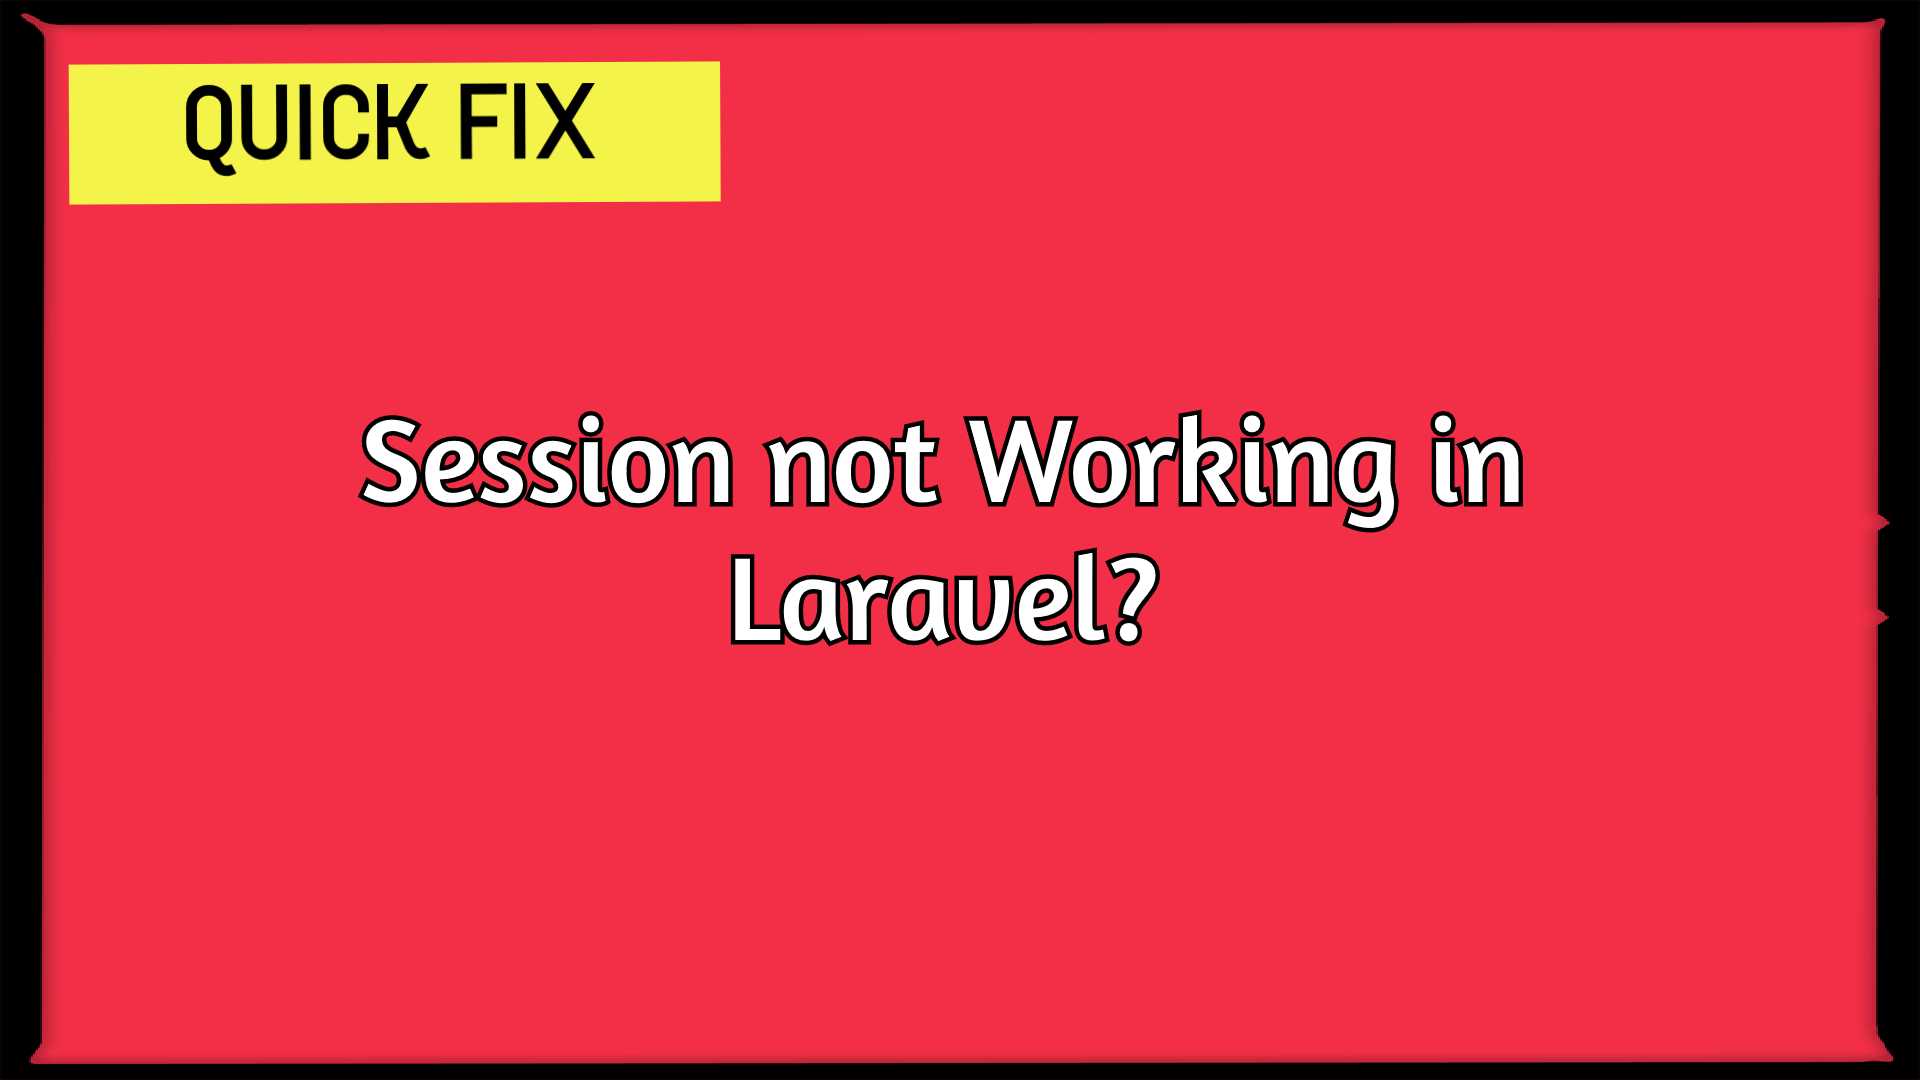 Session not working in Laravel